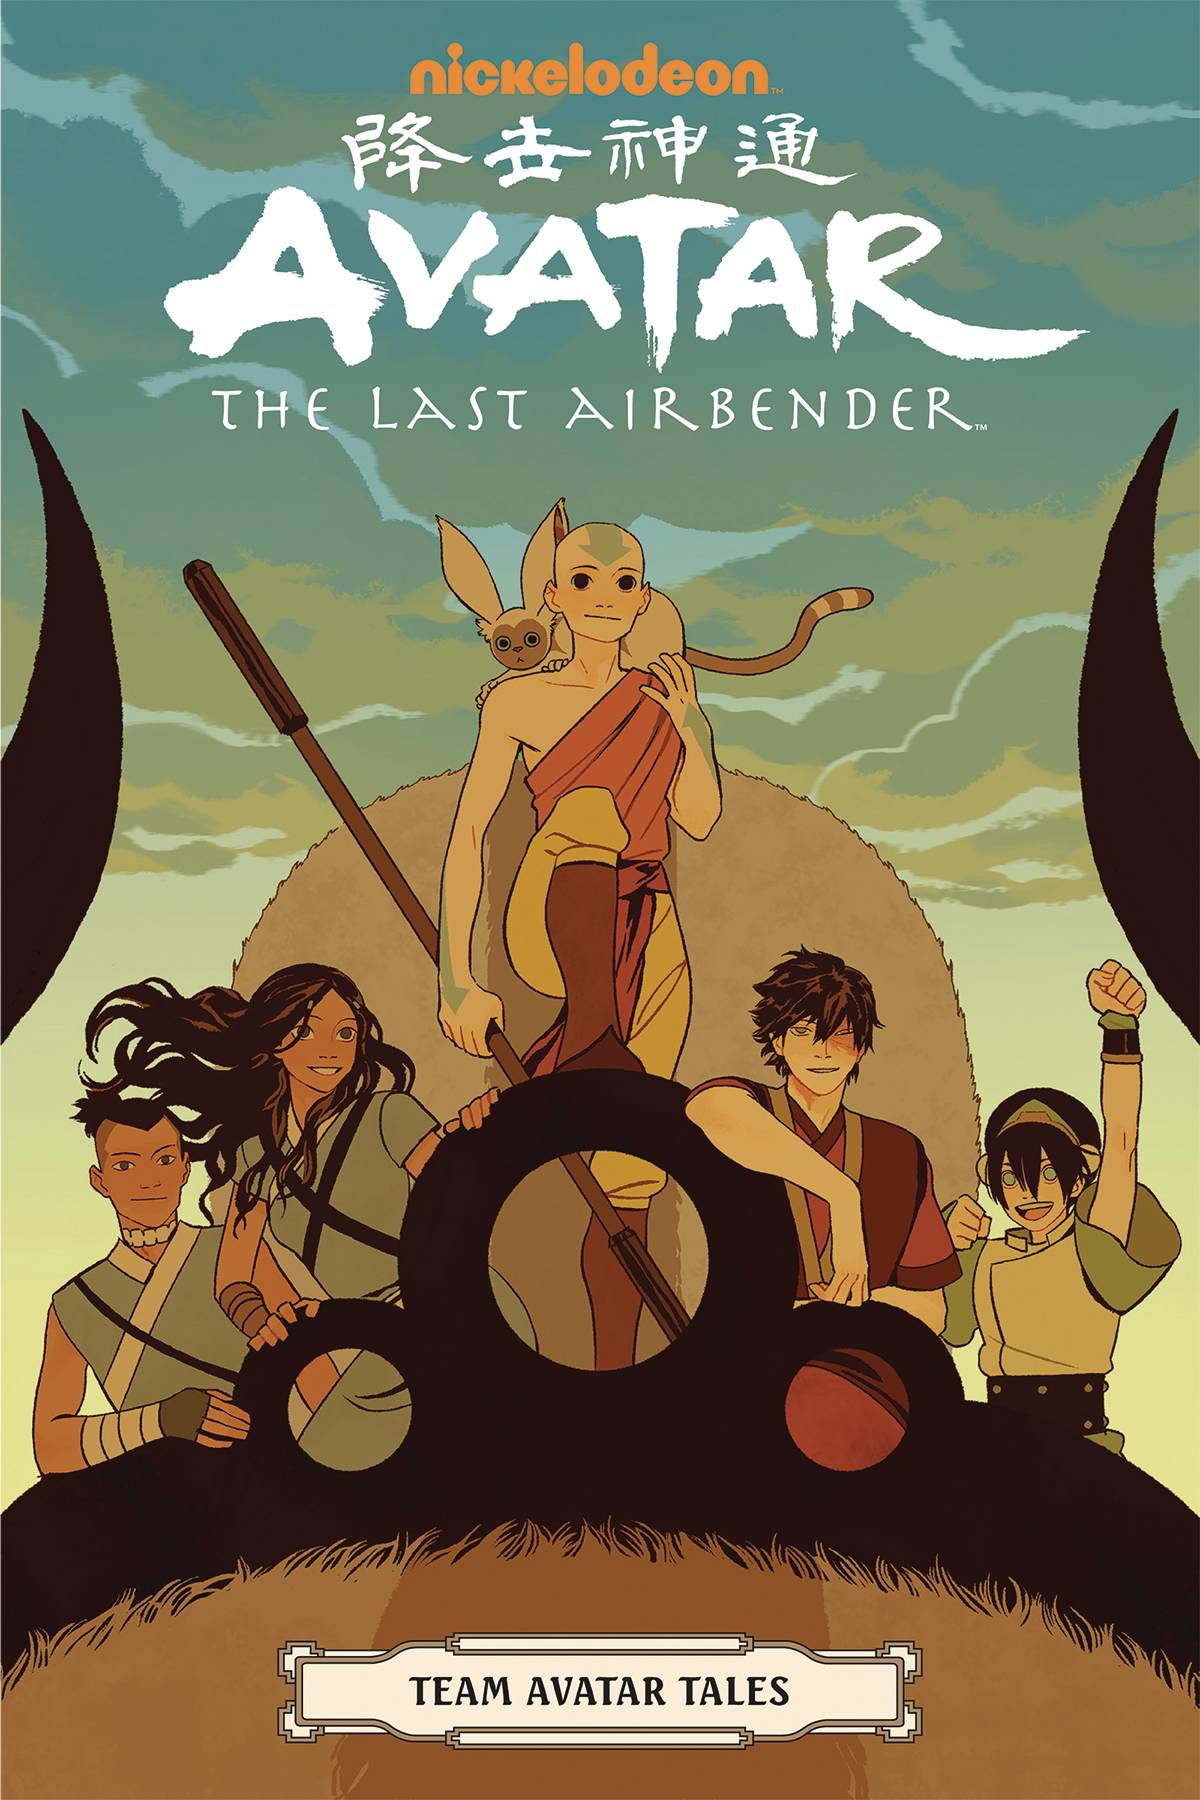 Avatar The Last Airbender is returning with its original creators